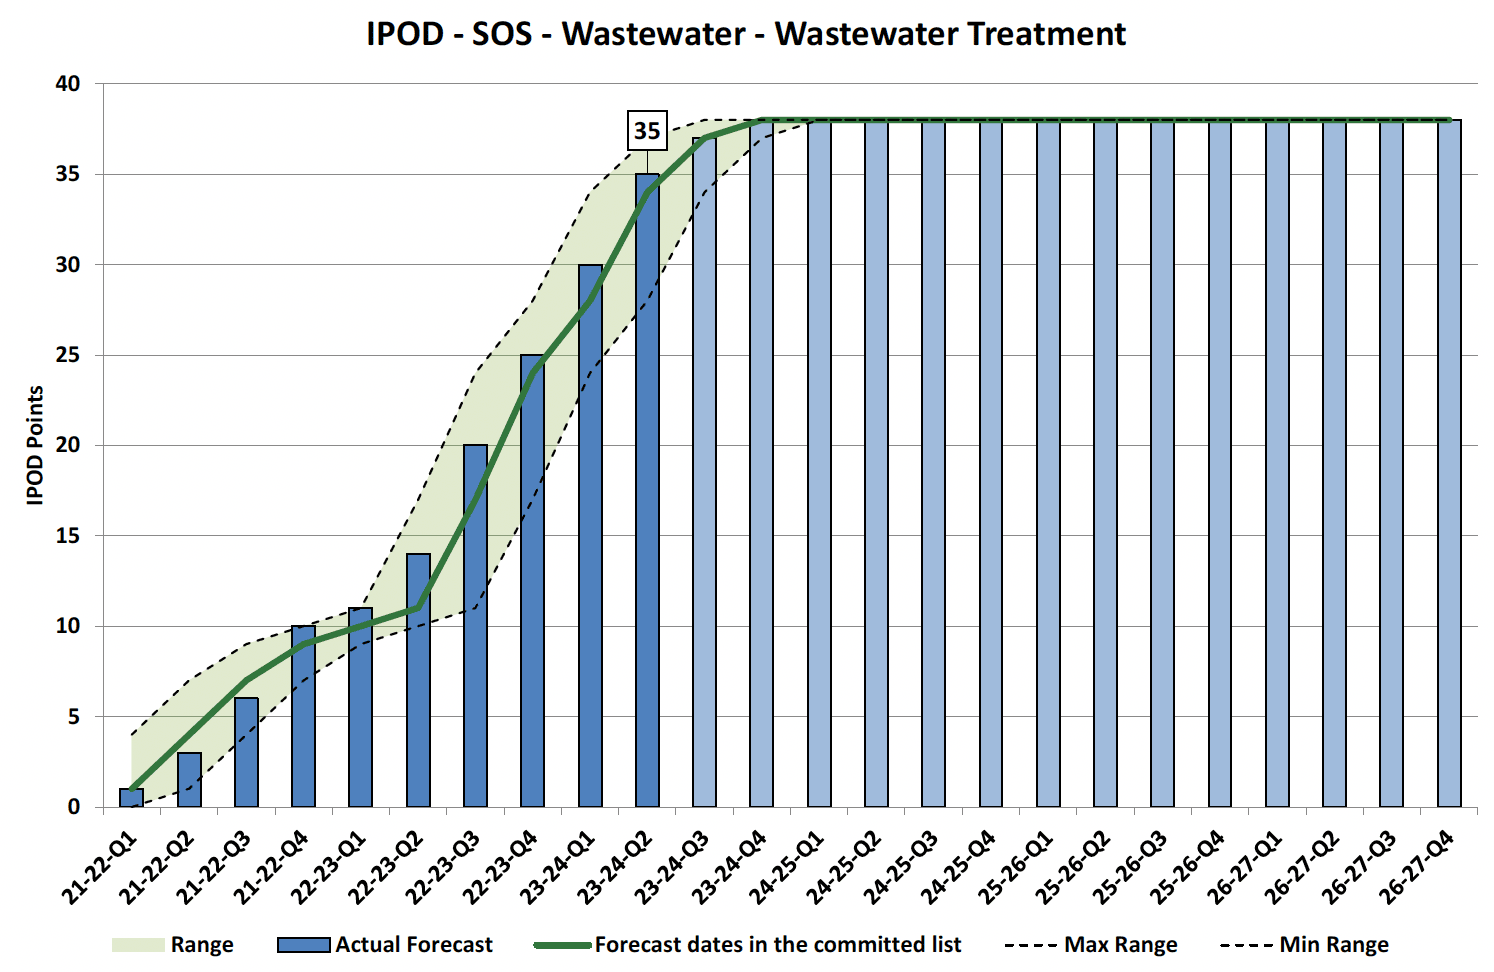 Chart showing IPOD points achieved or forecast for Start on Site milestone against target range for Wastewater Treatment Projects in Wastewater Portfolio